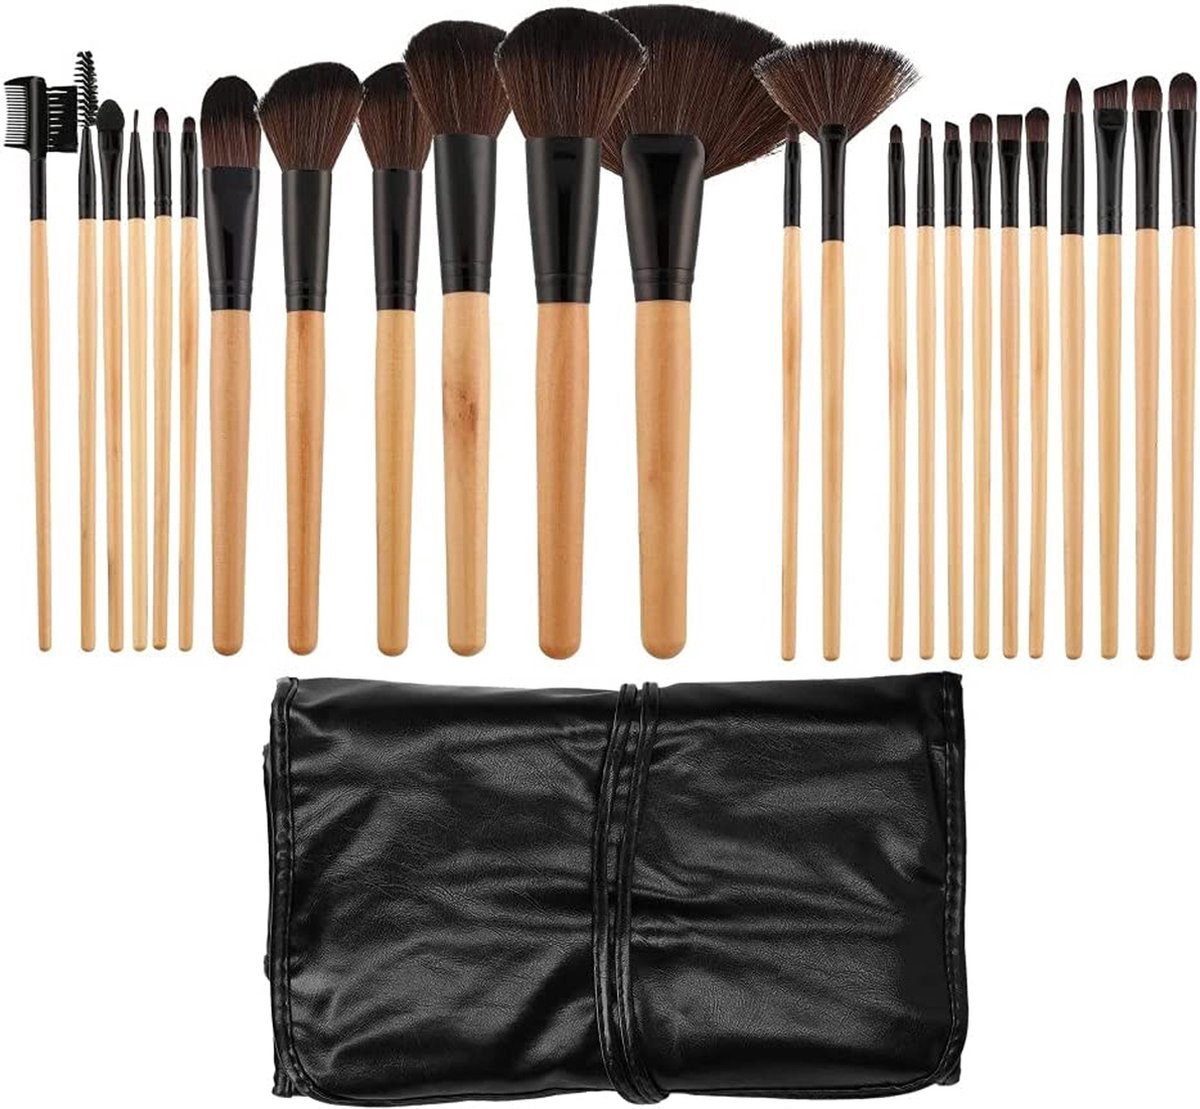 Tools For Beauty Make-Up Brush Set 24 Pieces - Black